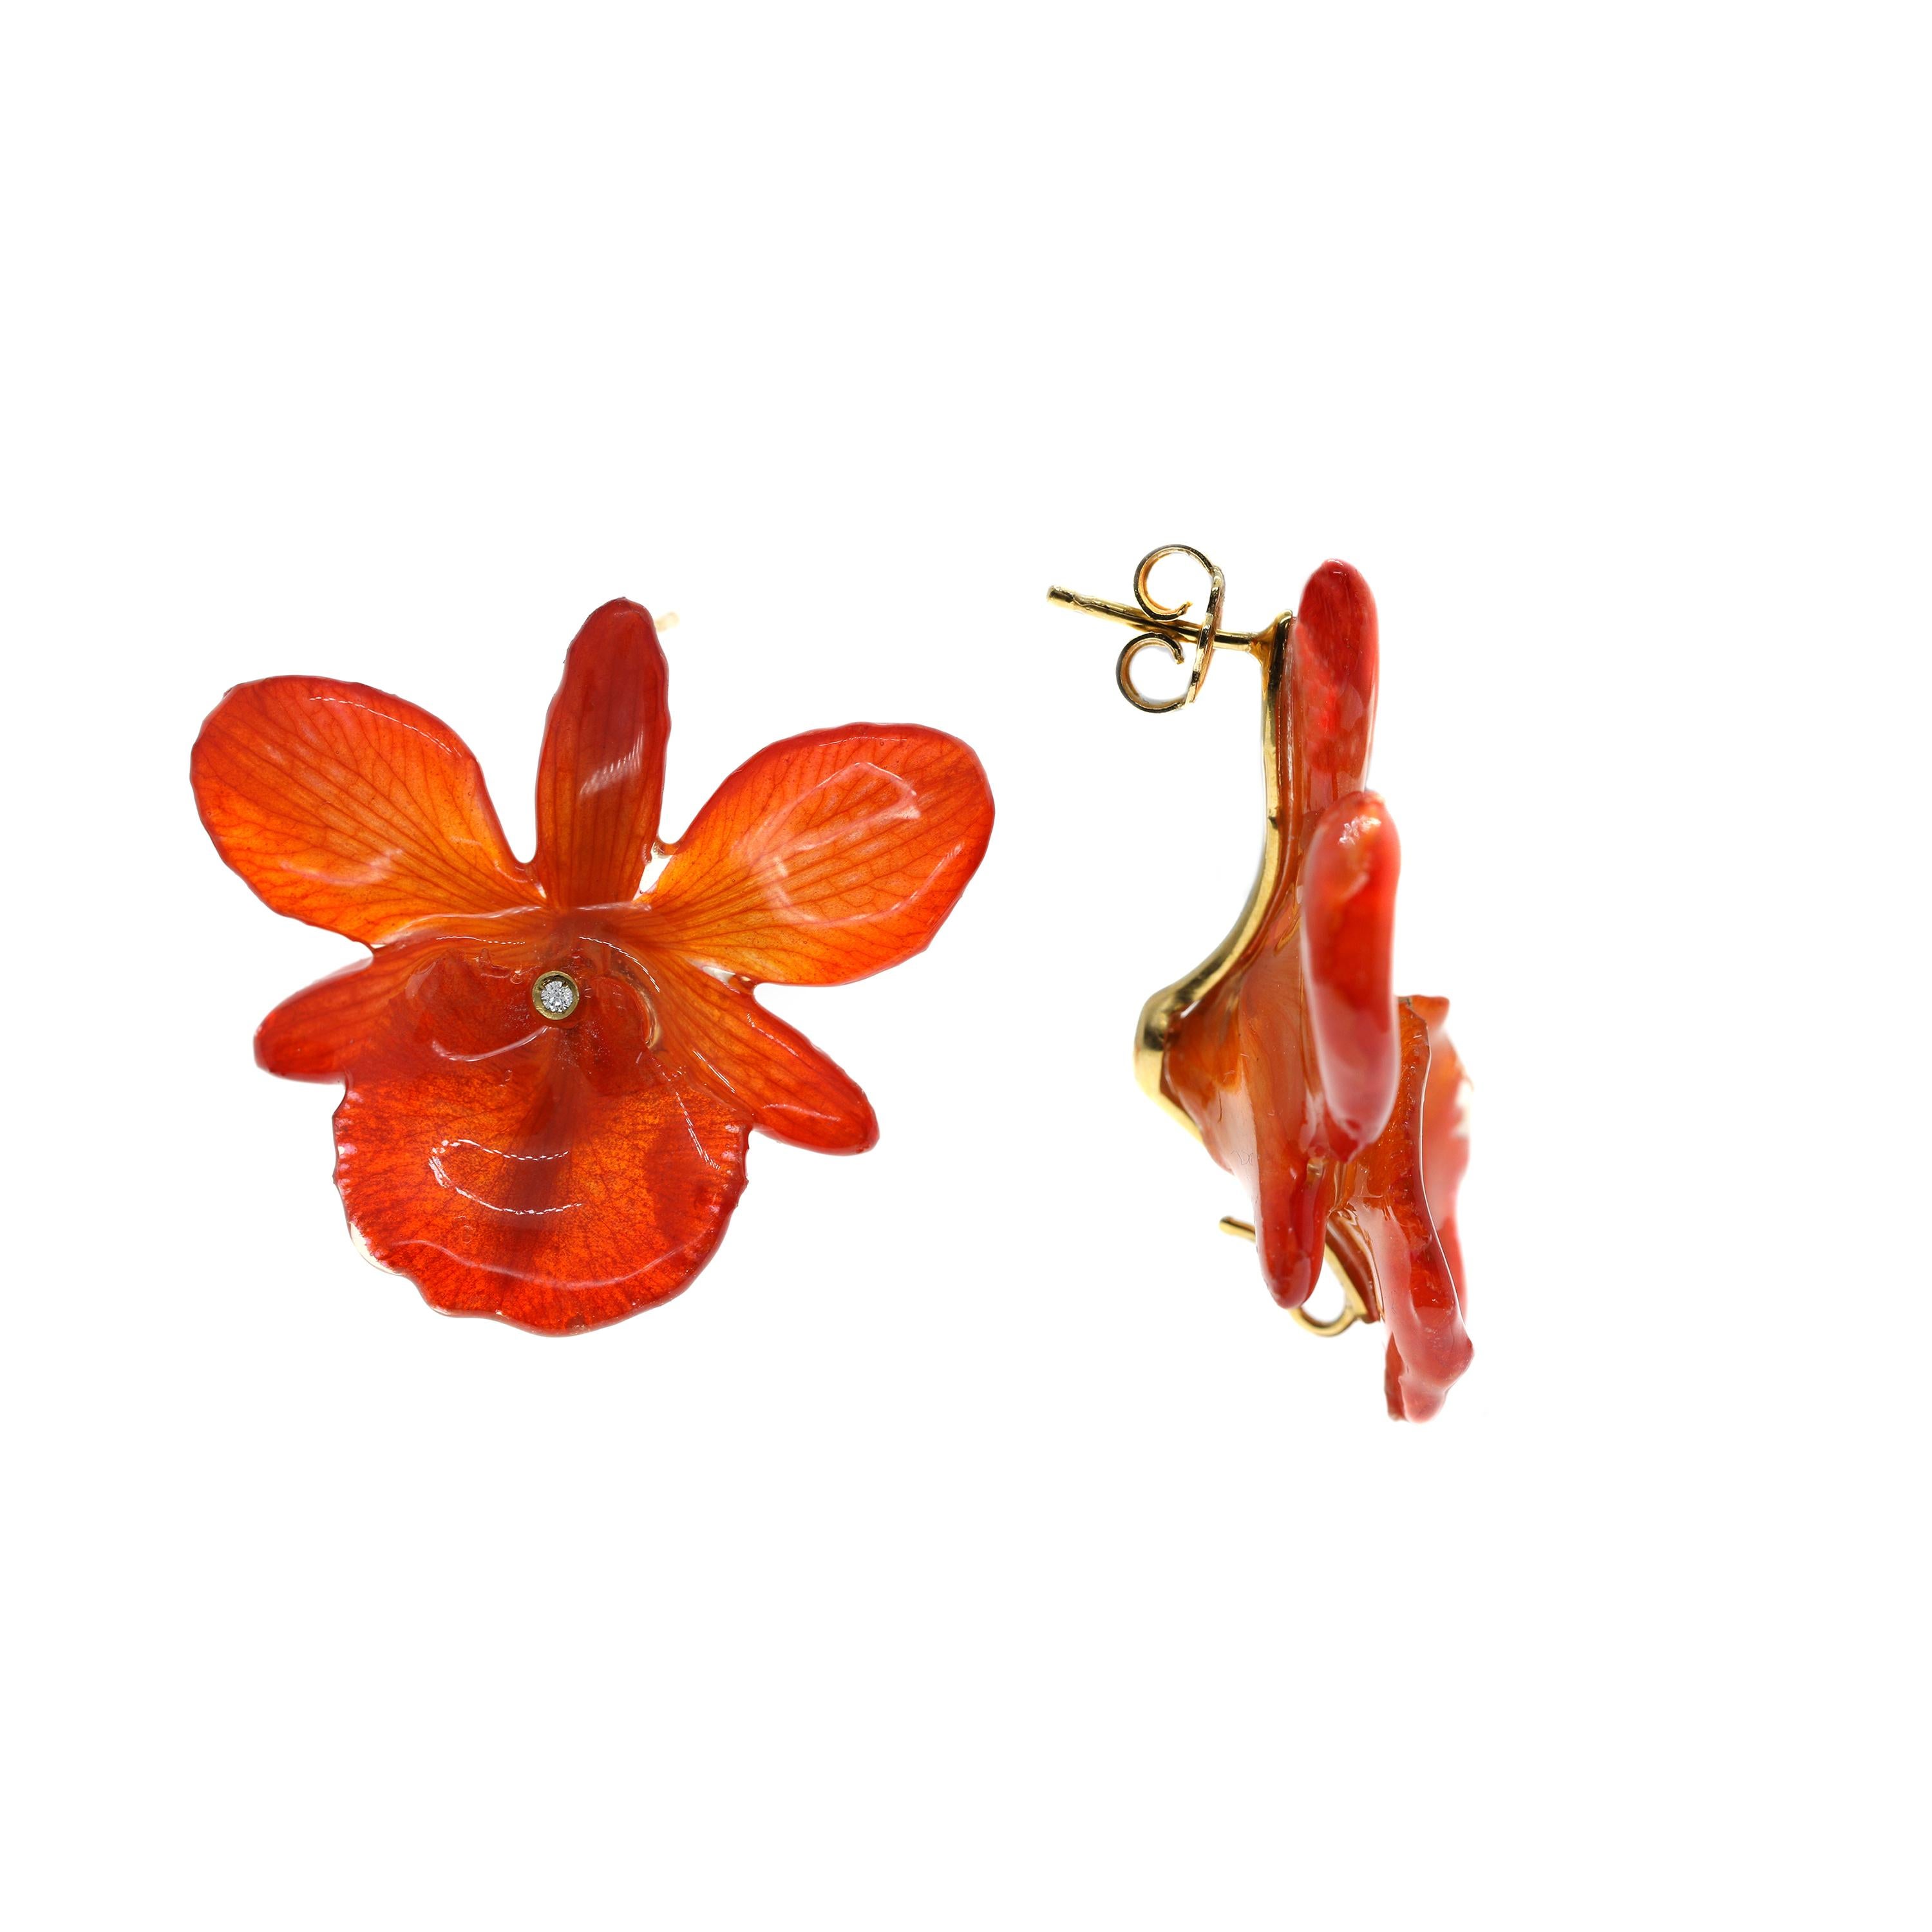 A vibrant pair of floral earrings masterfully created entirely by hand. Each earring features a perfect bloom from a real orchid, which has been transformed to preserve its beauty for eternity. 

The orchids post-backed earrings are approximately